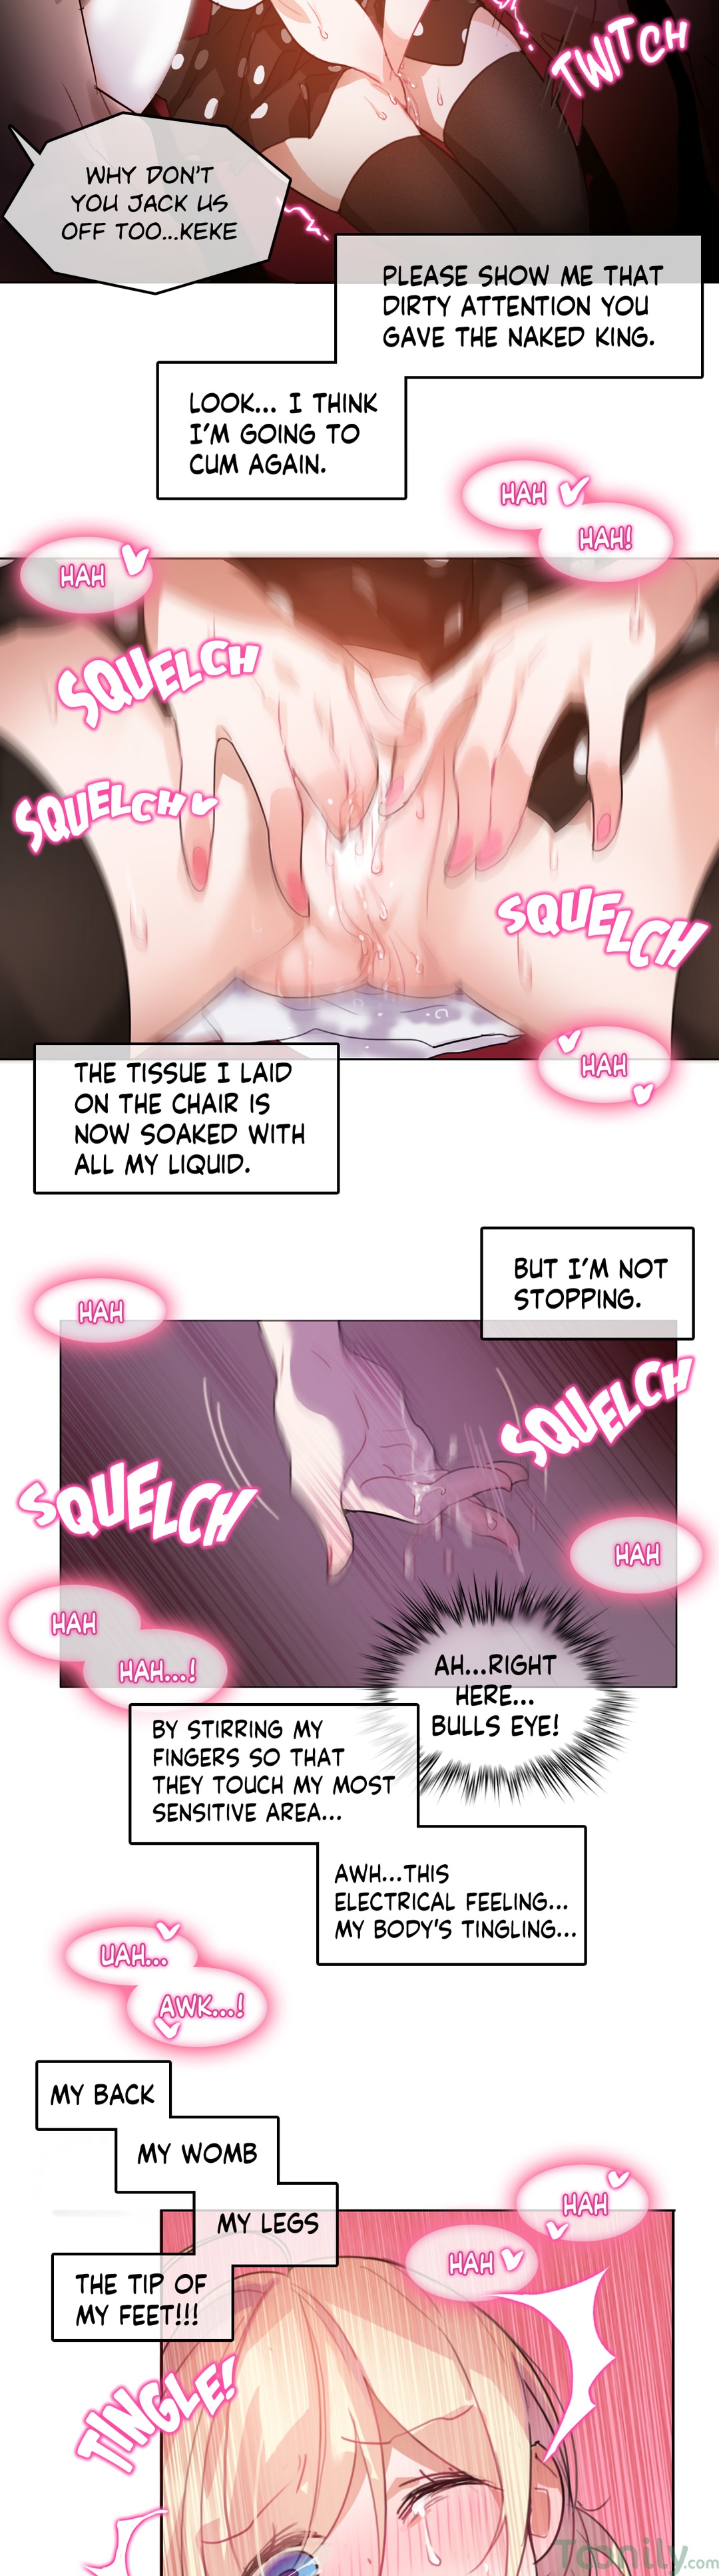 A Pervert's Daily Life - 3 page 8